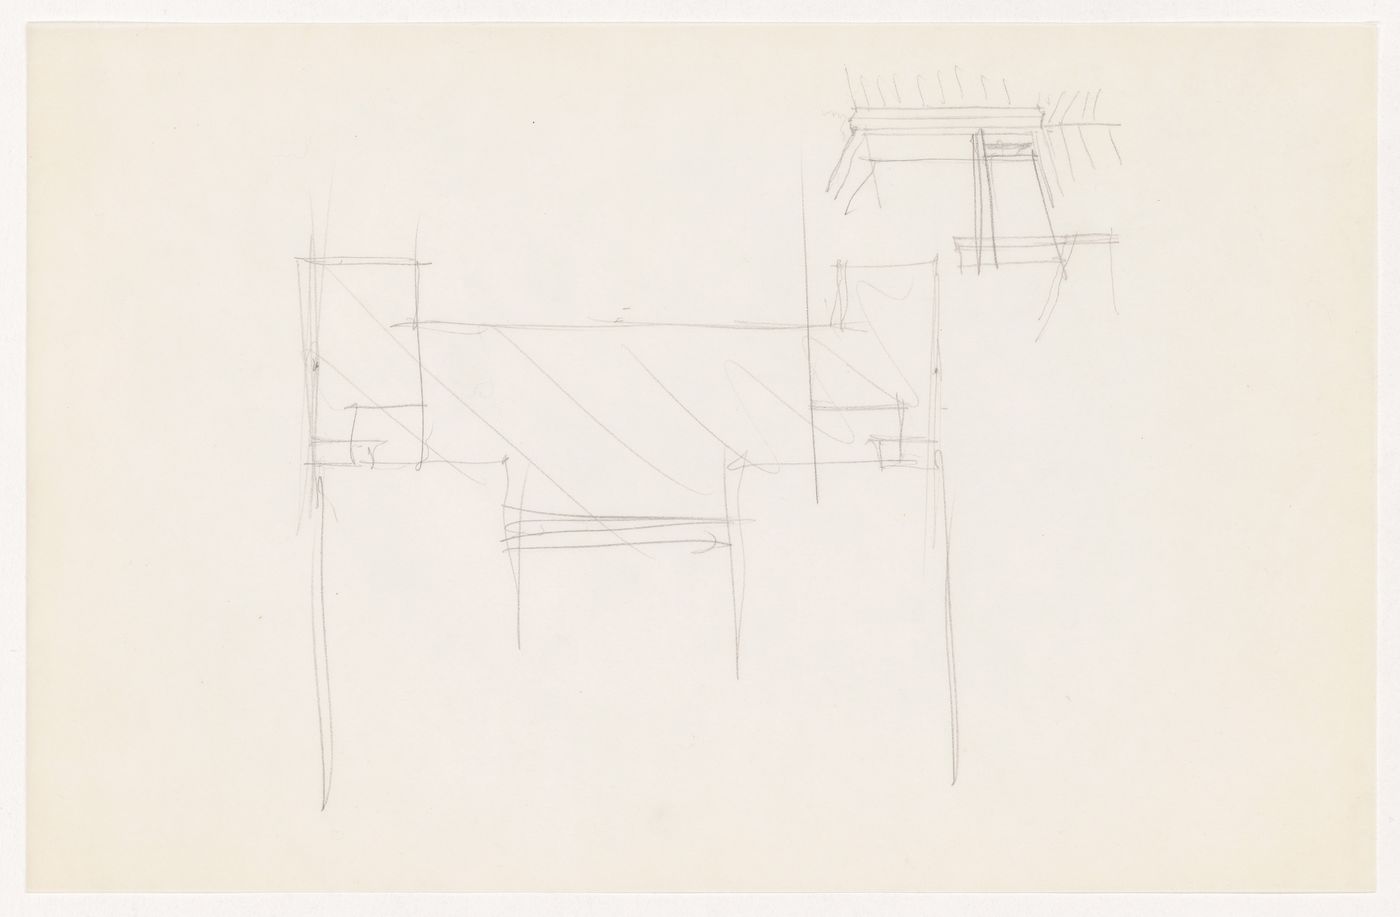 Perspective sketch showing window mullion and wall connection at corner and sketch sectional detail for the Metallurgy Building, Illinois Institute of Technology, Chicago